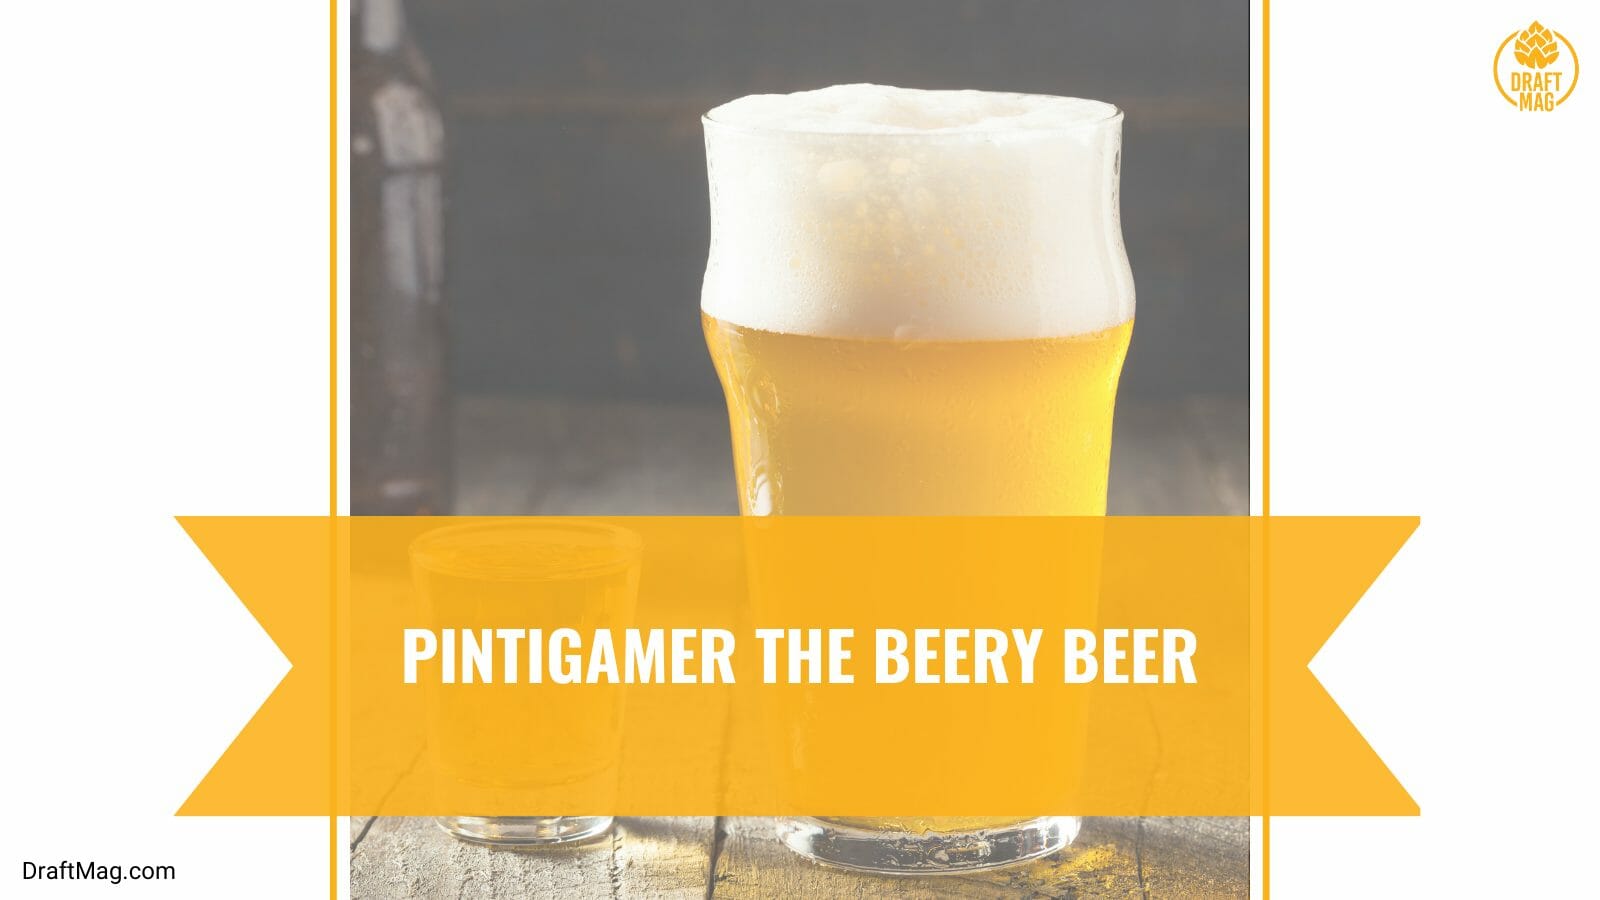 Puntigamer the beery beer